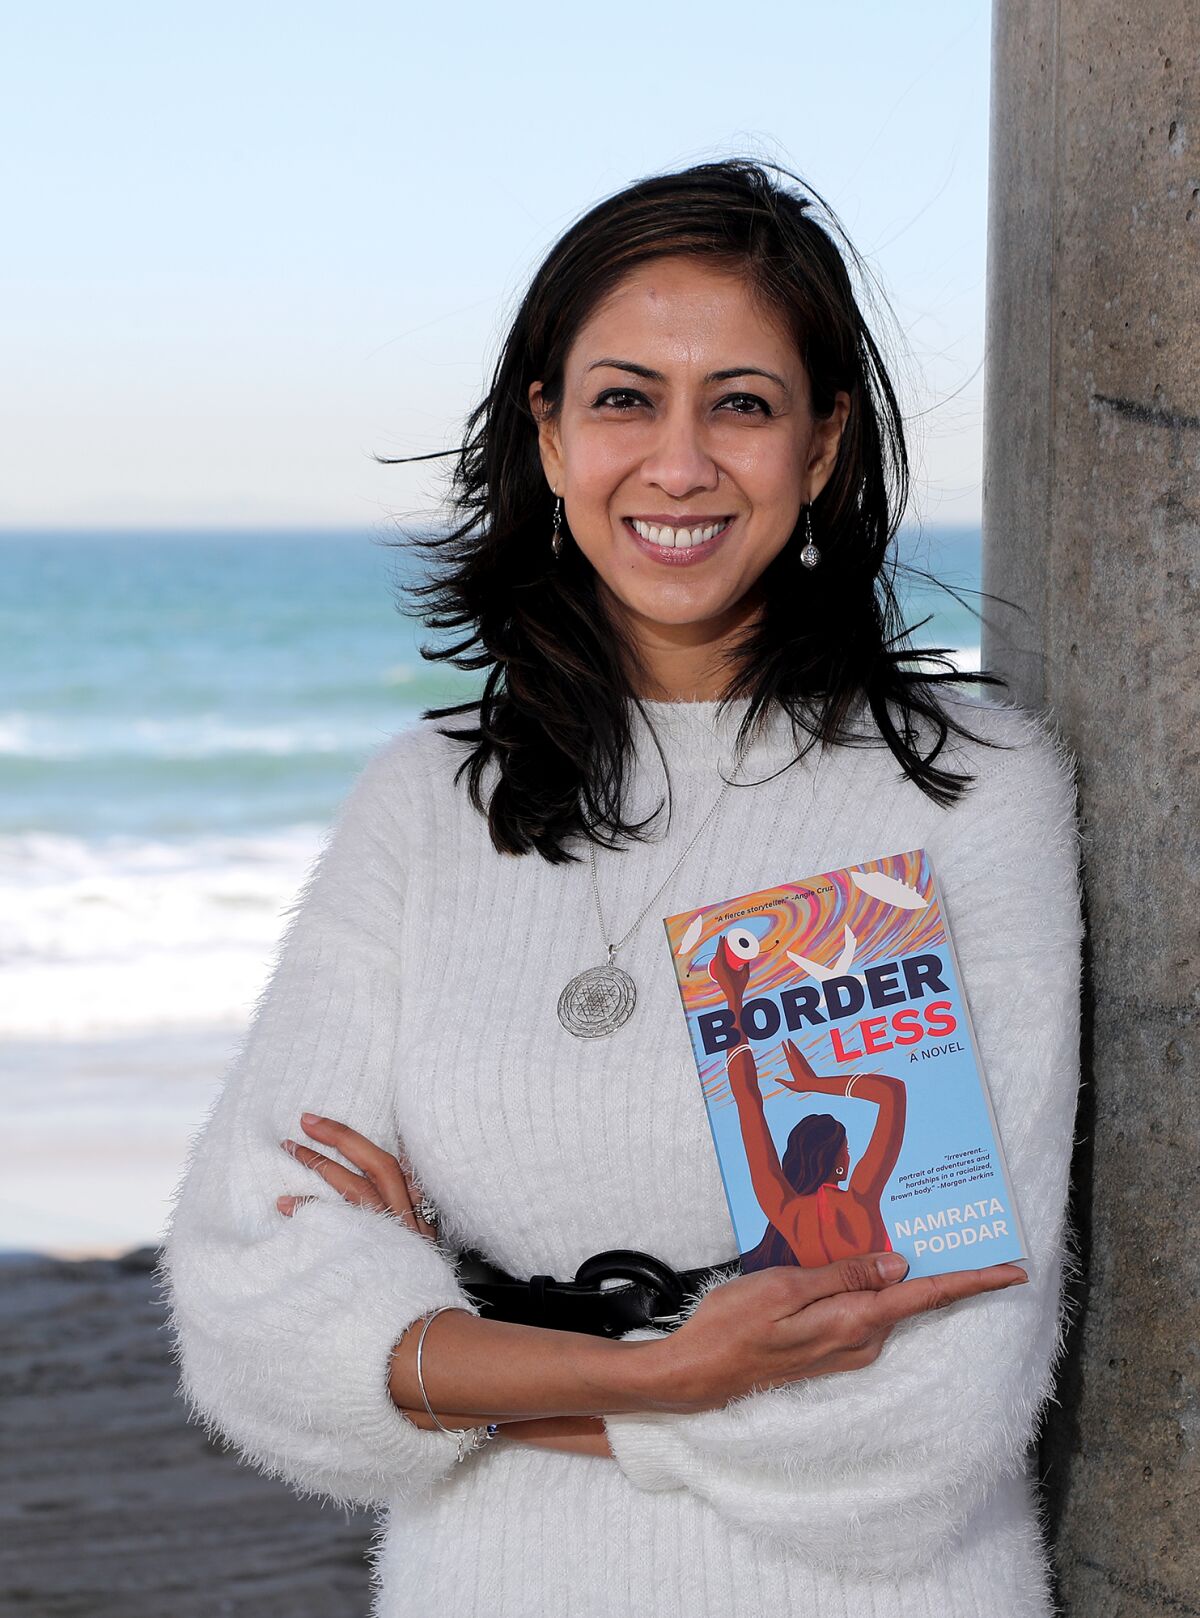 Namrata Poddar is a Huntington Beach-based author who just published her first novel "Border Less" this month. 